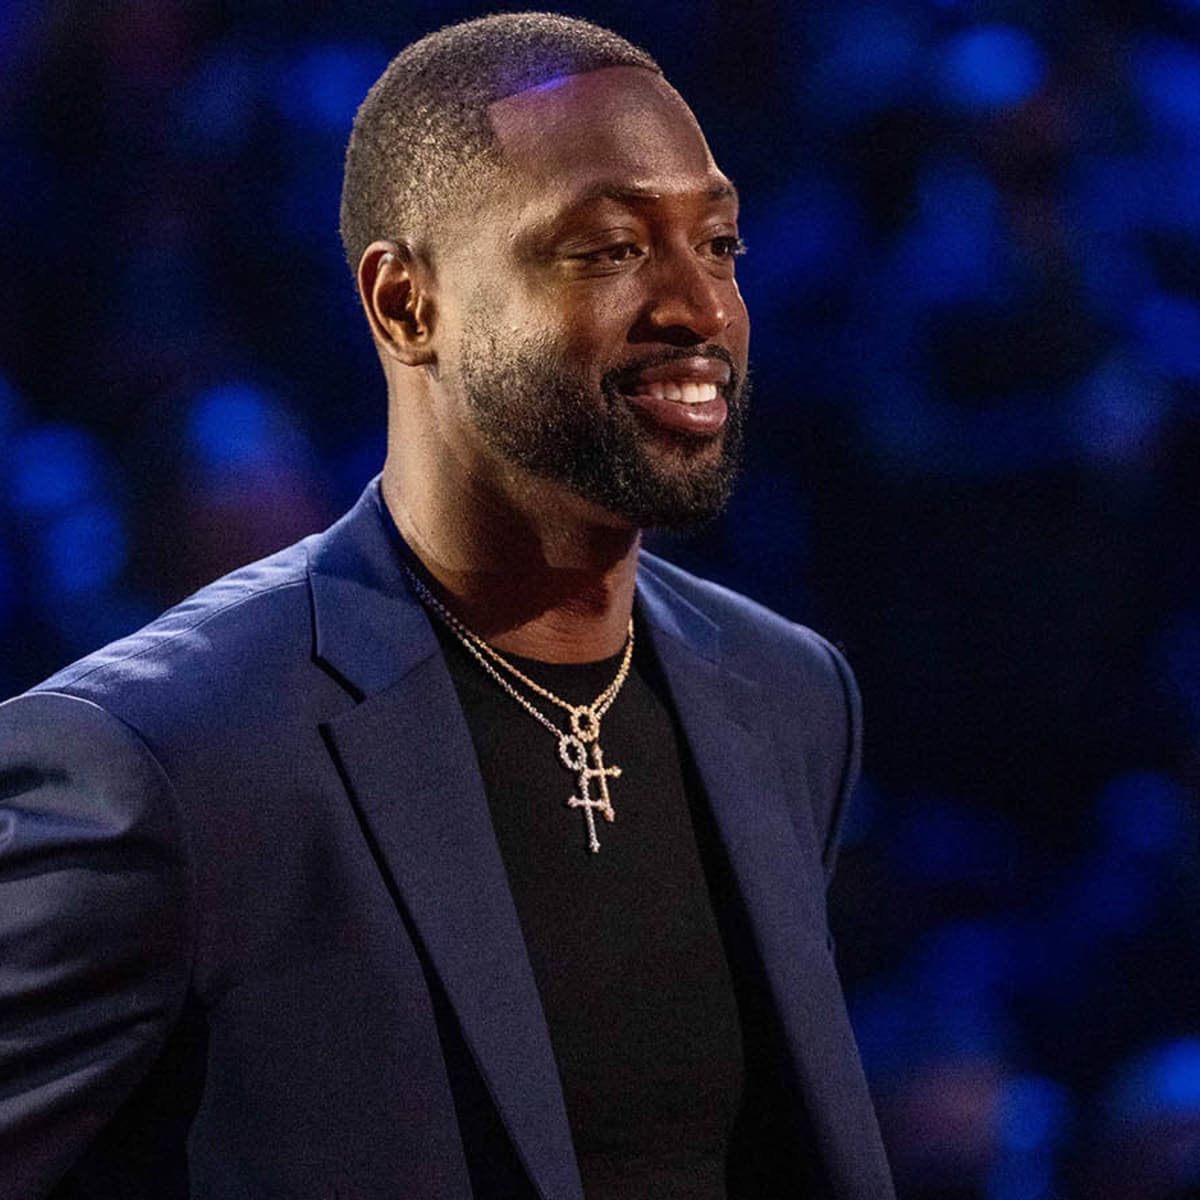 Is it just me or does Dwyane Wade now look more like an NFL player